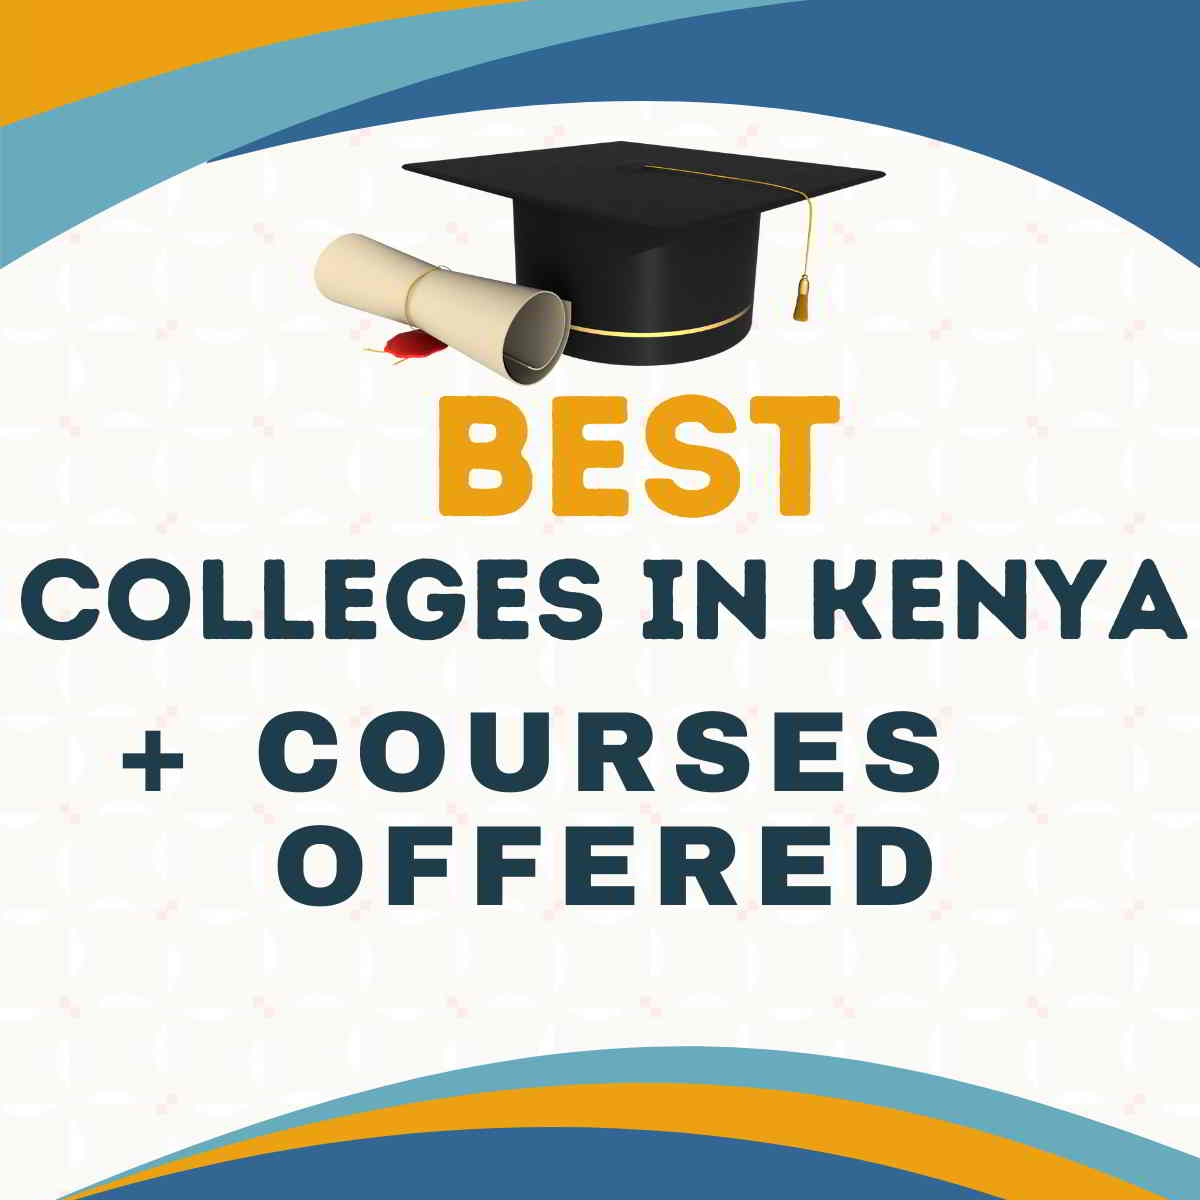 Best colleges in Kenya and courses offered